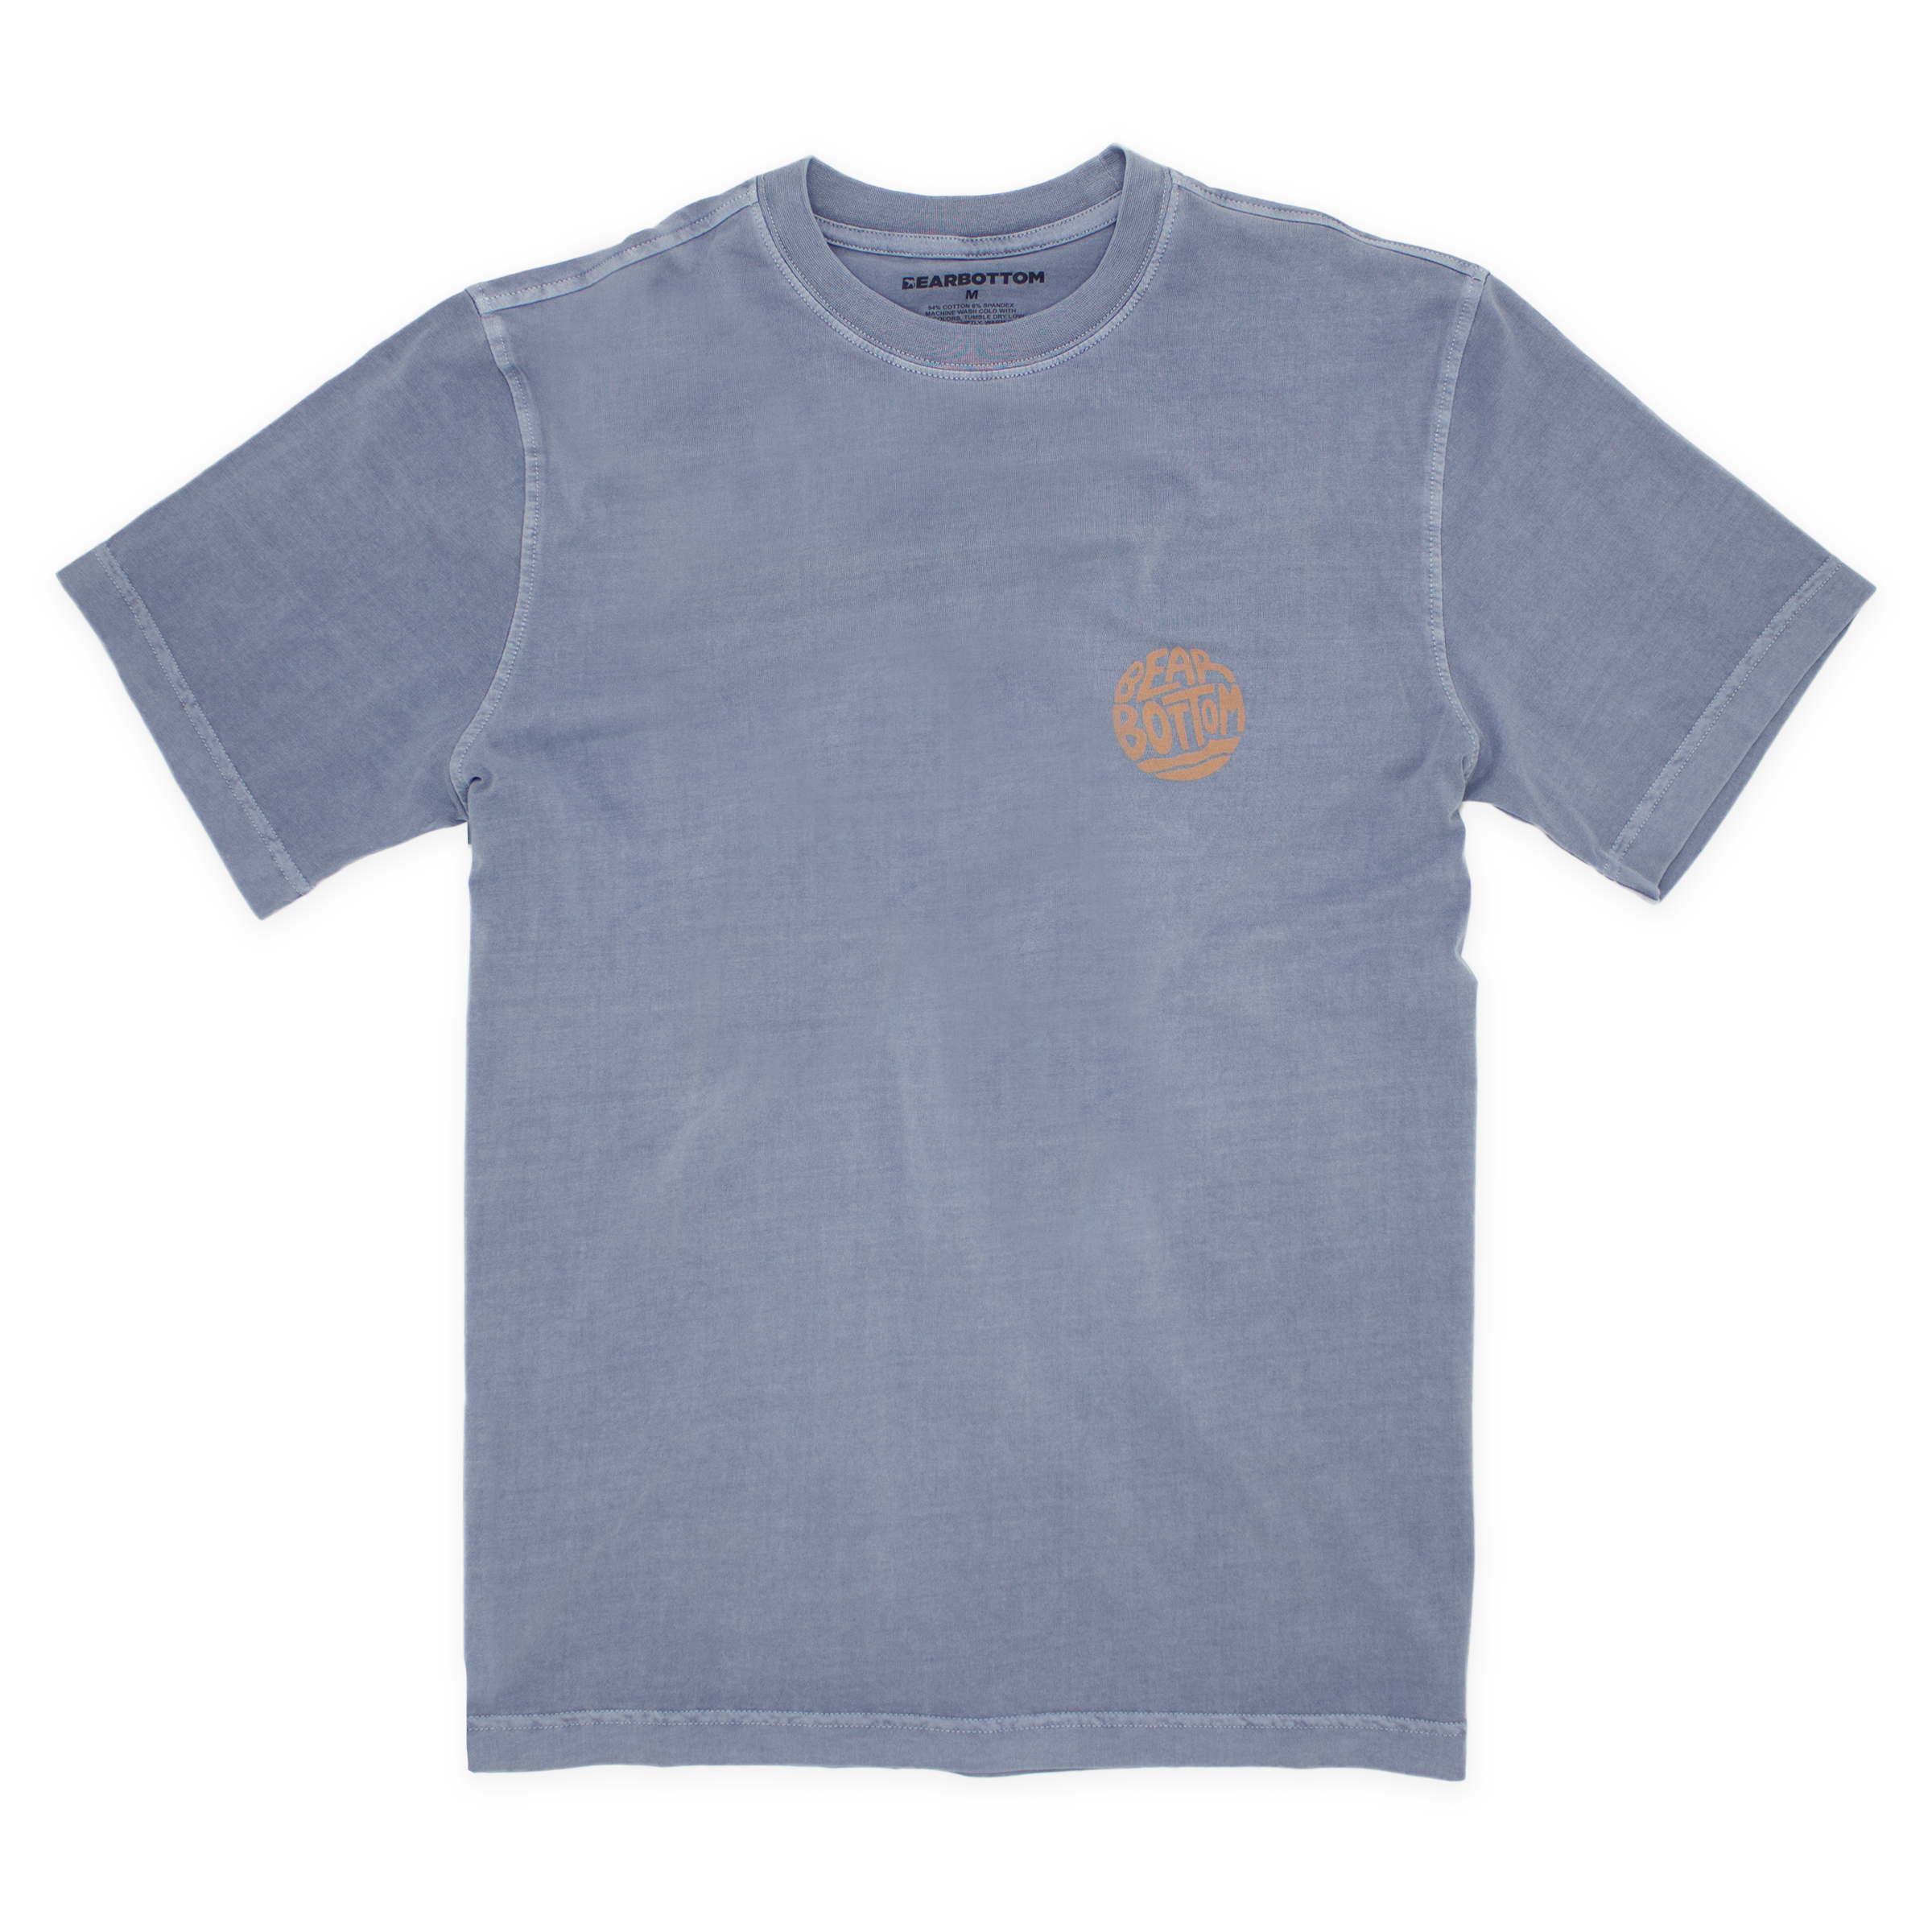 Natural Dye Graphic Tee Hangout ocean blue color with dark yellow Bearbottom in shape of circle